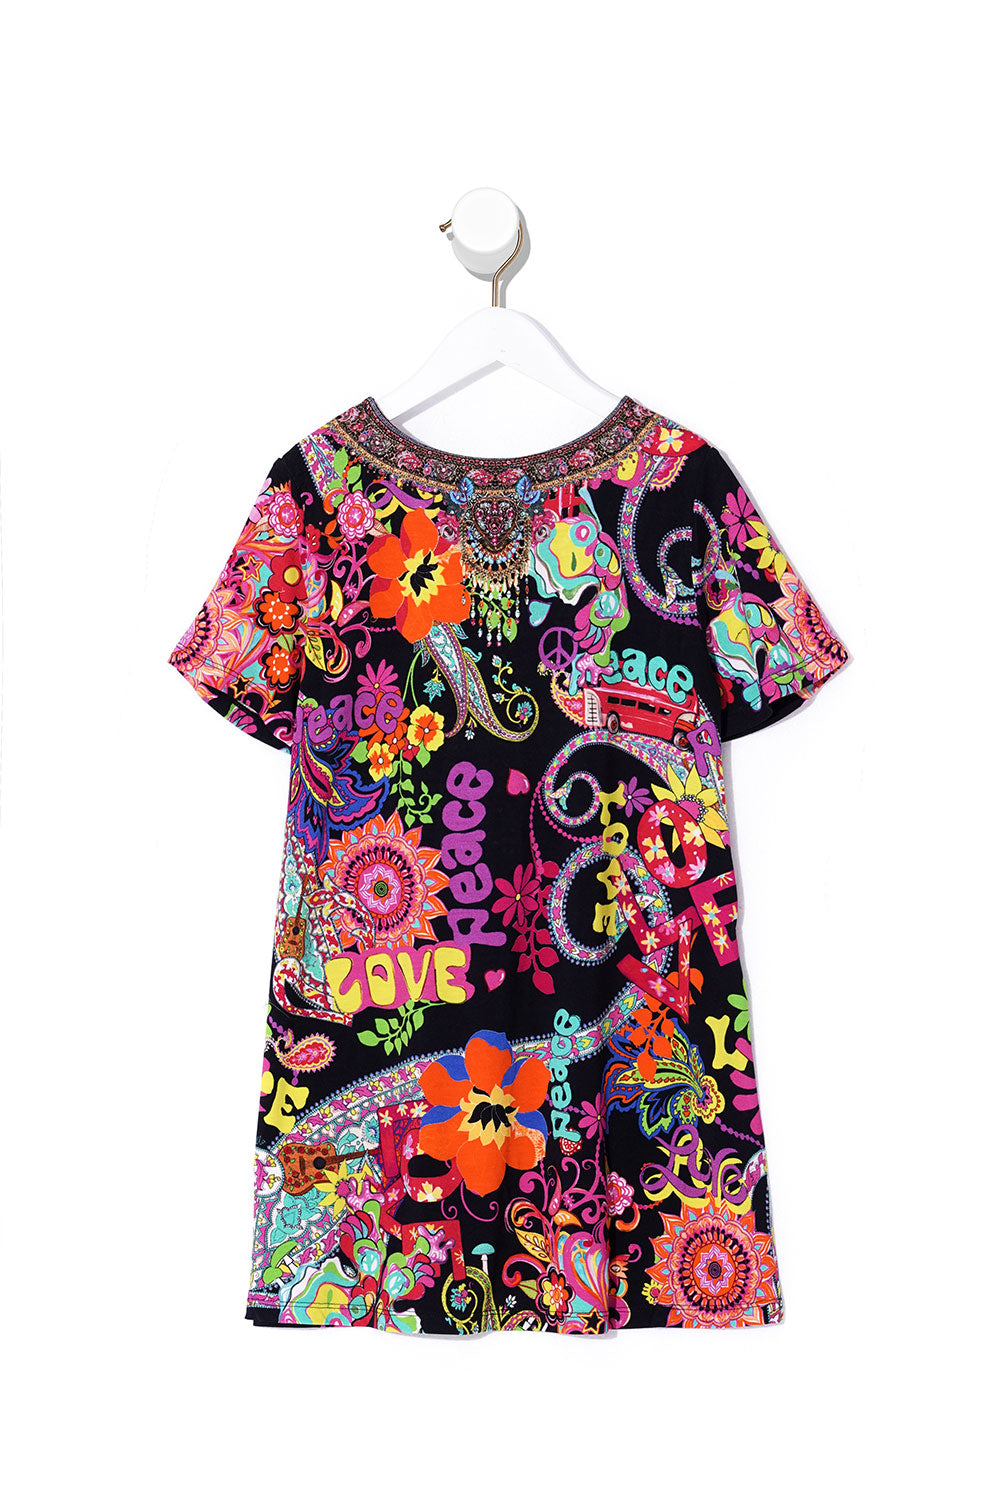 INFANTS TSHIRT DRESS WITH FLARE HEM PEACE LOVE AND HAIR